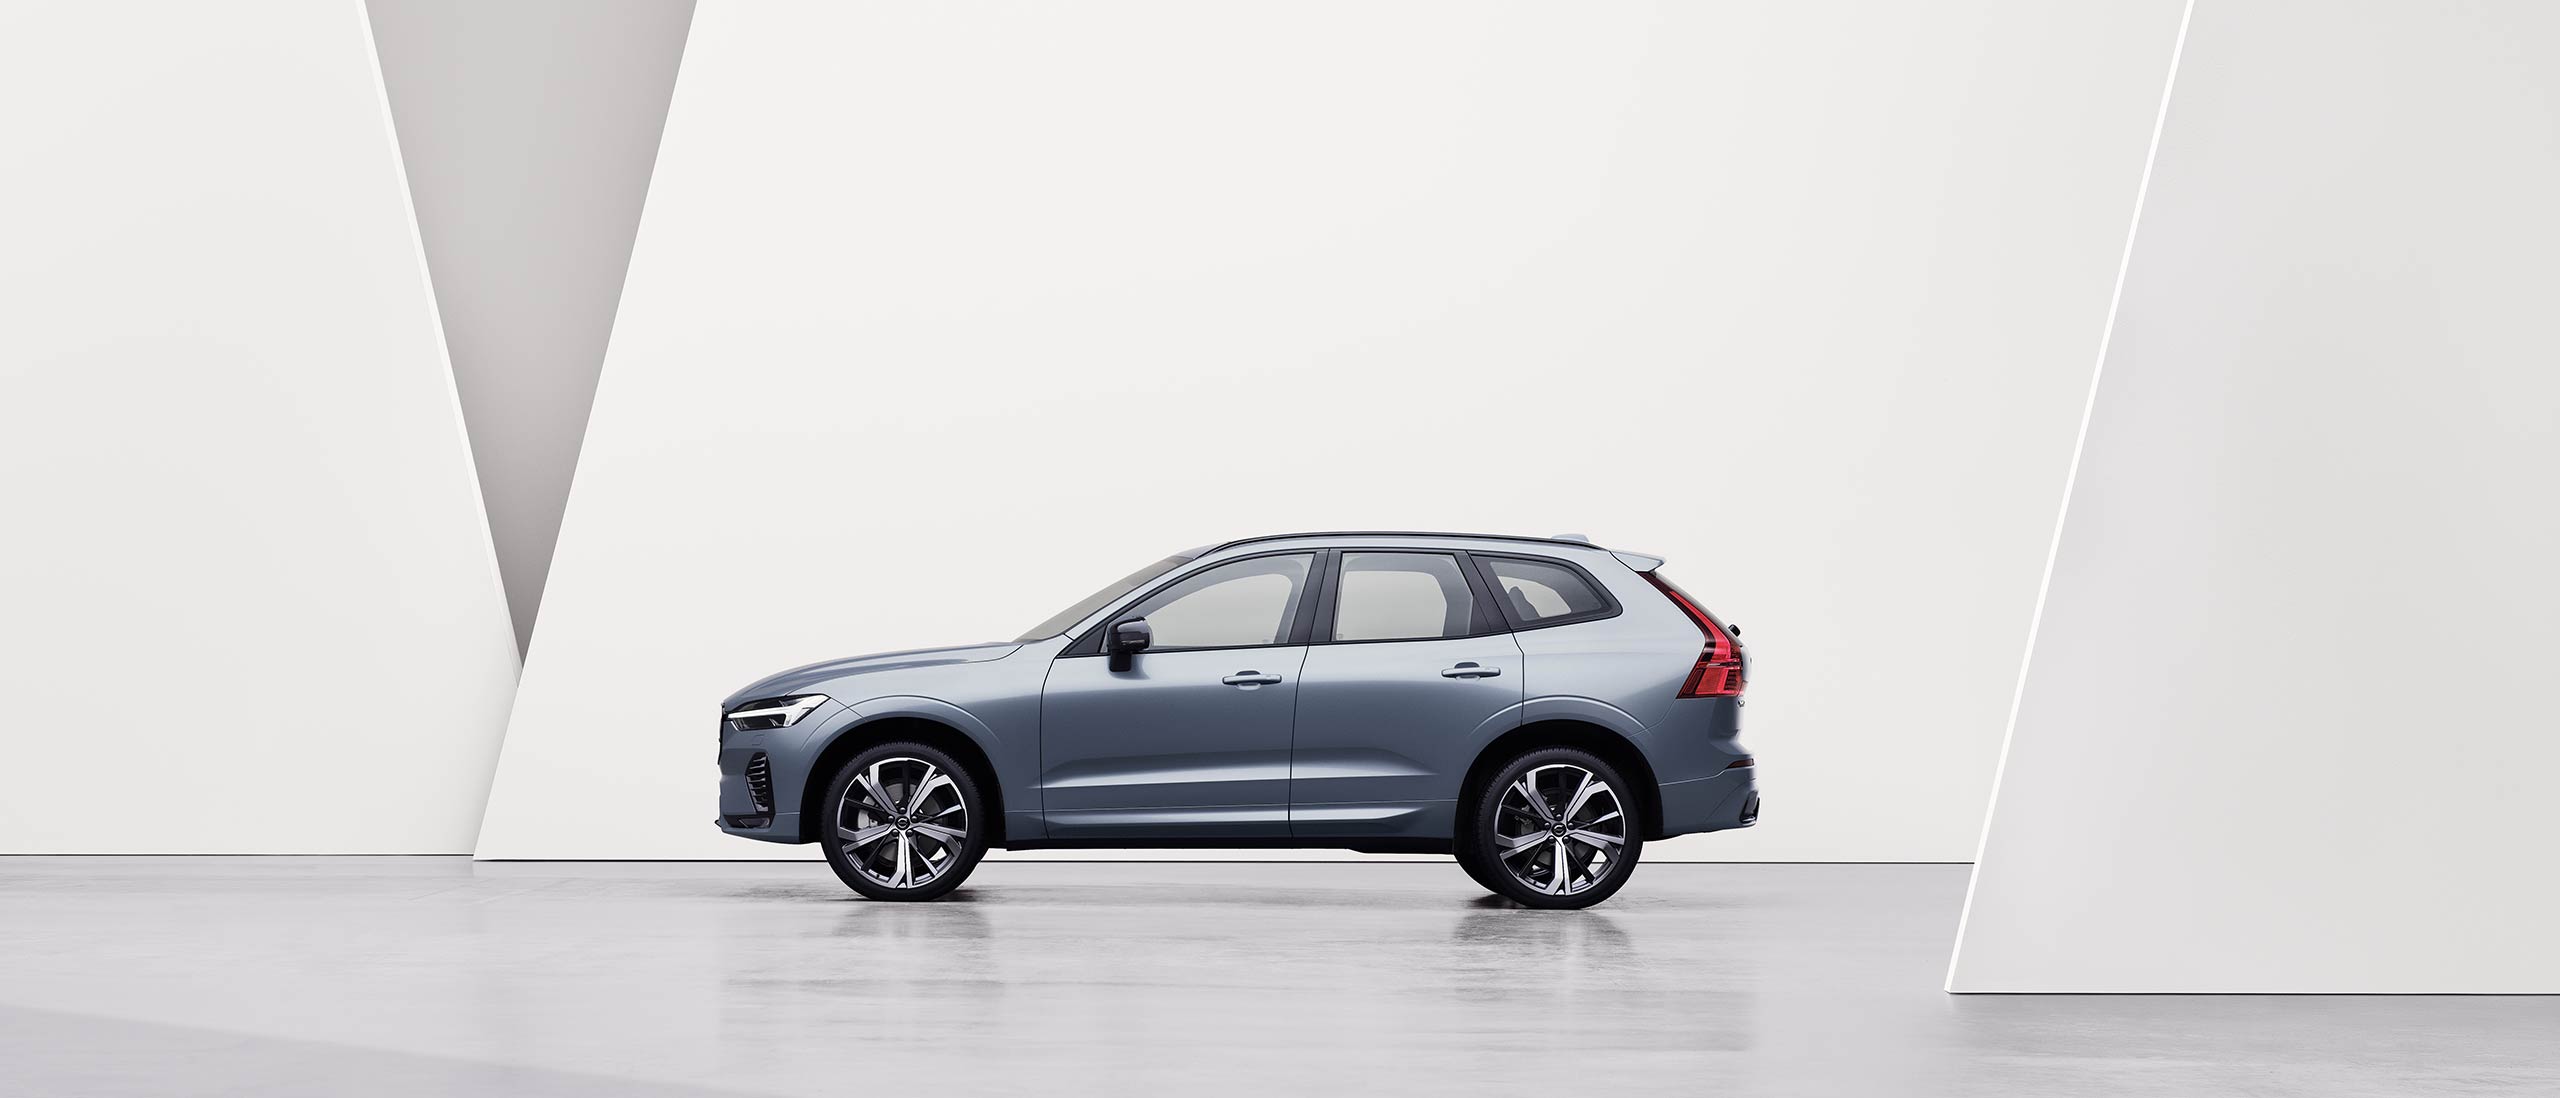 The side profile of a gray Volvo XC60 SUV